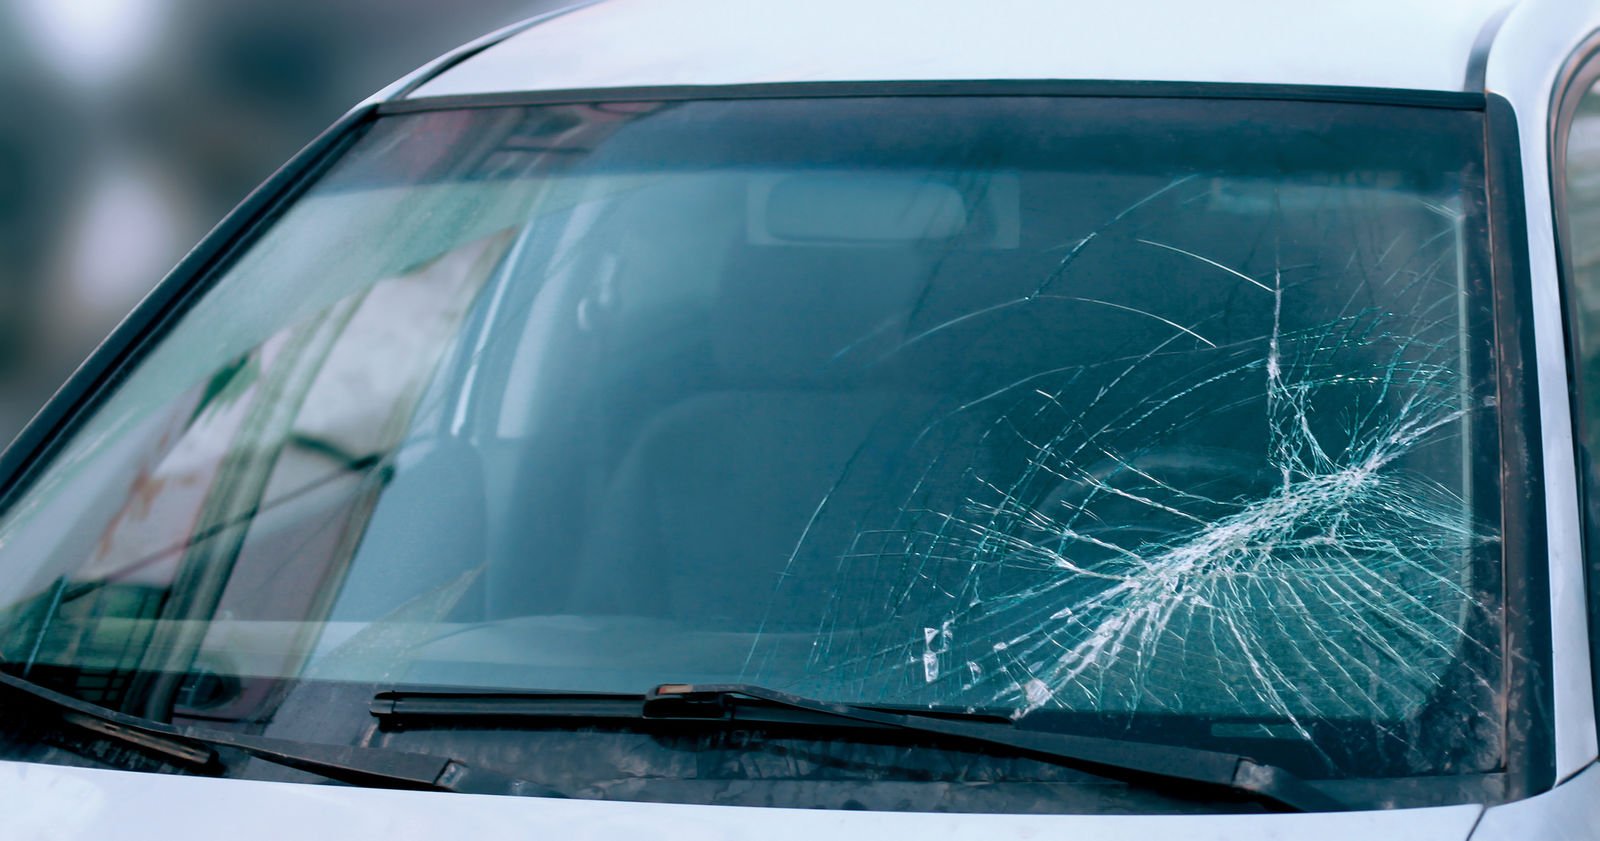 Windshield Replacement Insurance: Will auto insurance cover a cracked windshield?